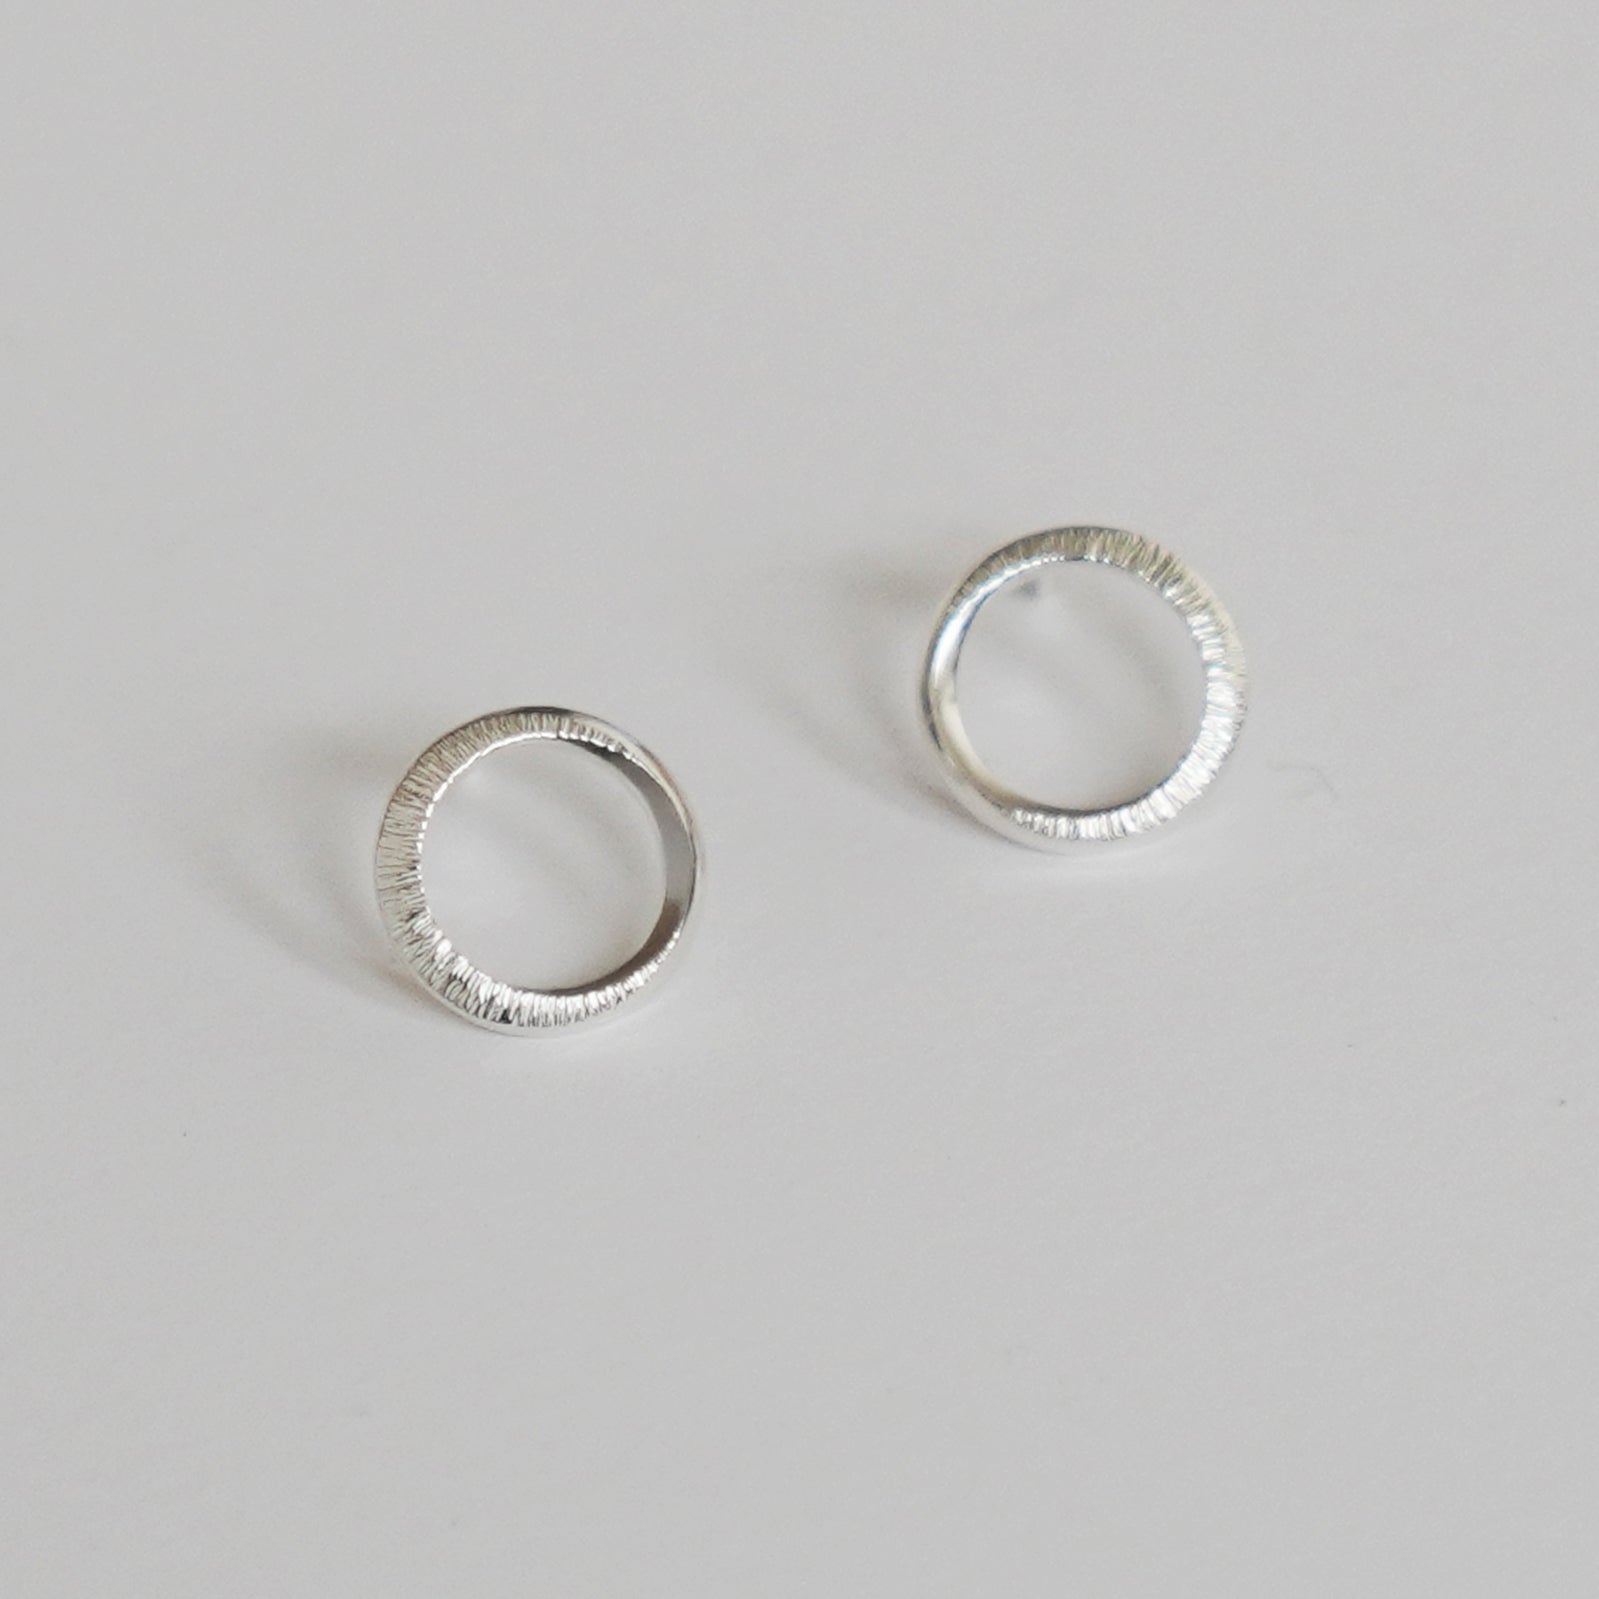 Crescent Moon Hammered Circle Stud Earrings - Silver - Aisling Chou Studio